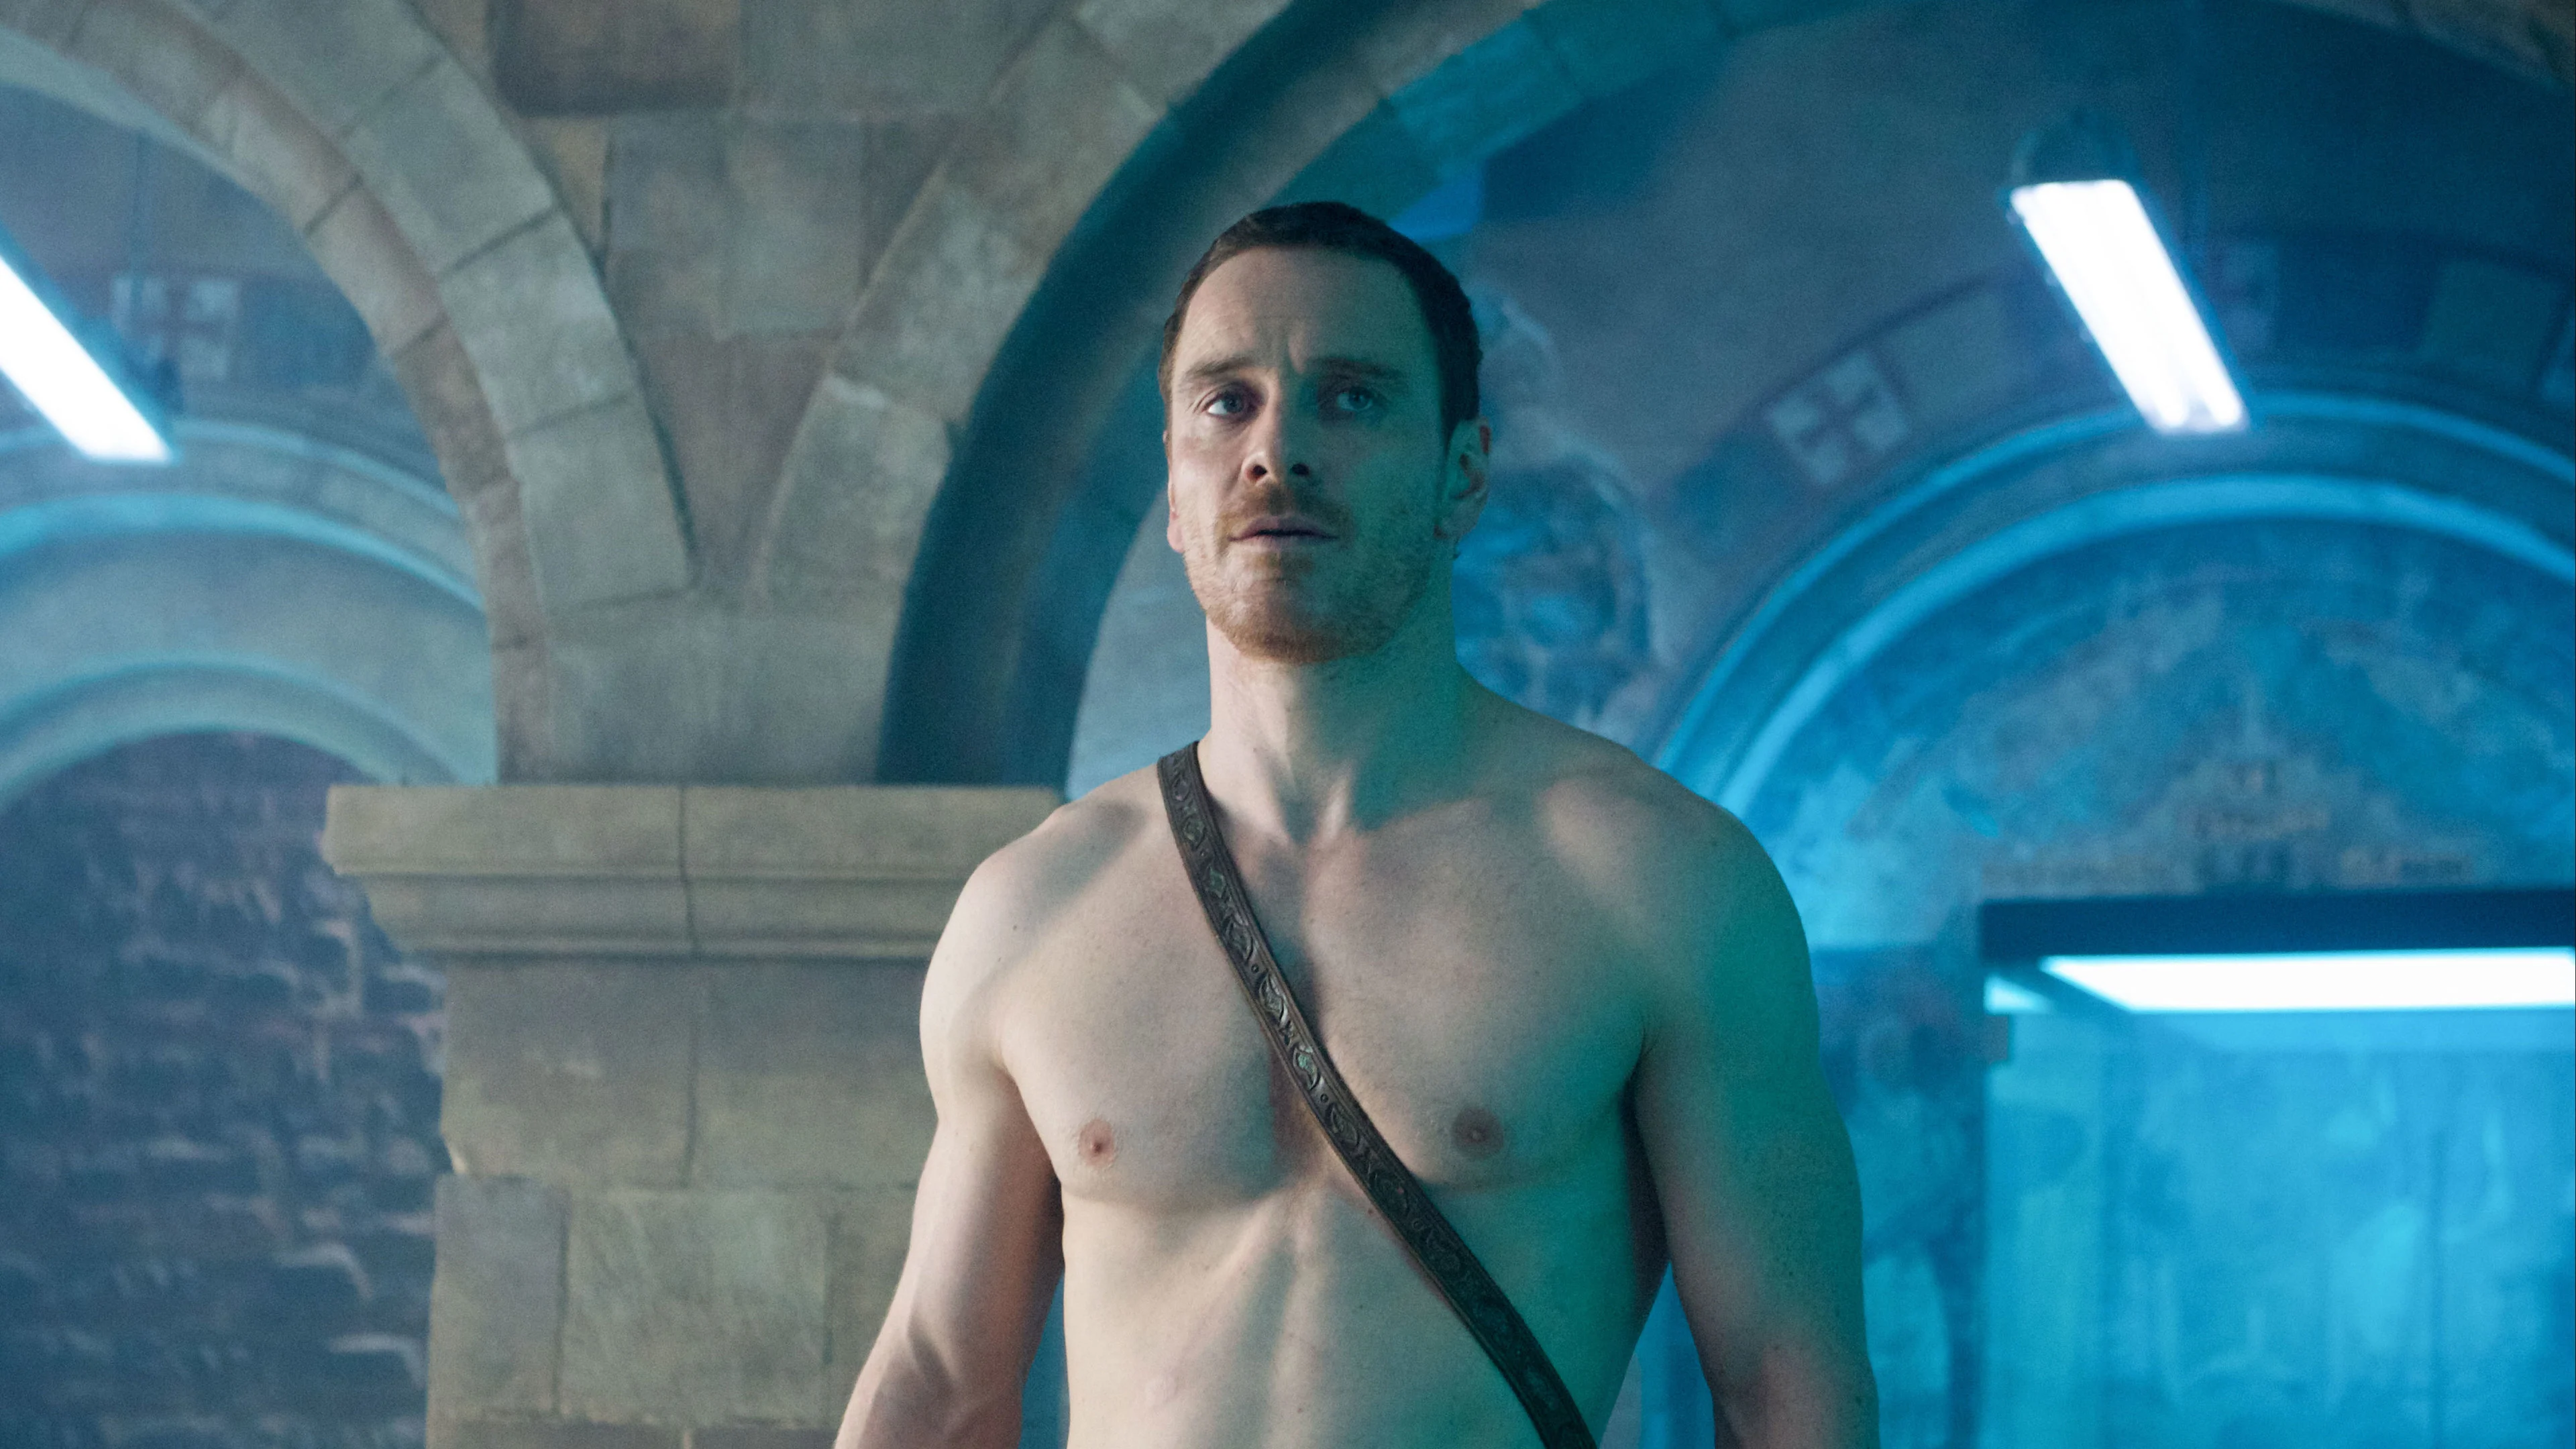 michael fassbender assassins creed movie 1536400674 - Michael Fassbender Assassins Creed Movie - movies wallpapers, michael fassbender wallpapers, assassins creed wallpapers, assassins creed movie wallpapers, 2016 movies wallpapers